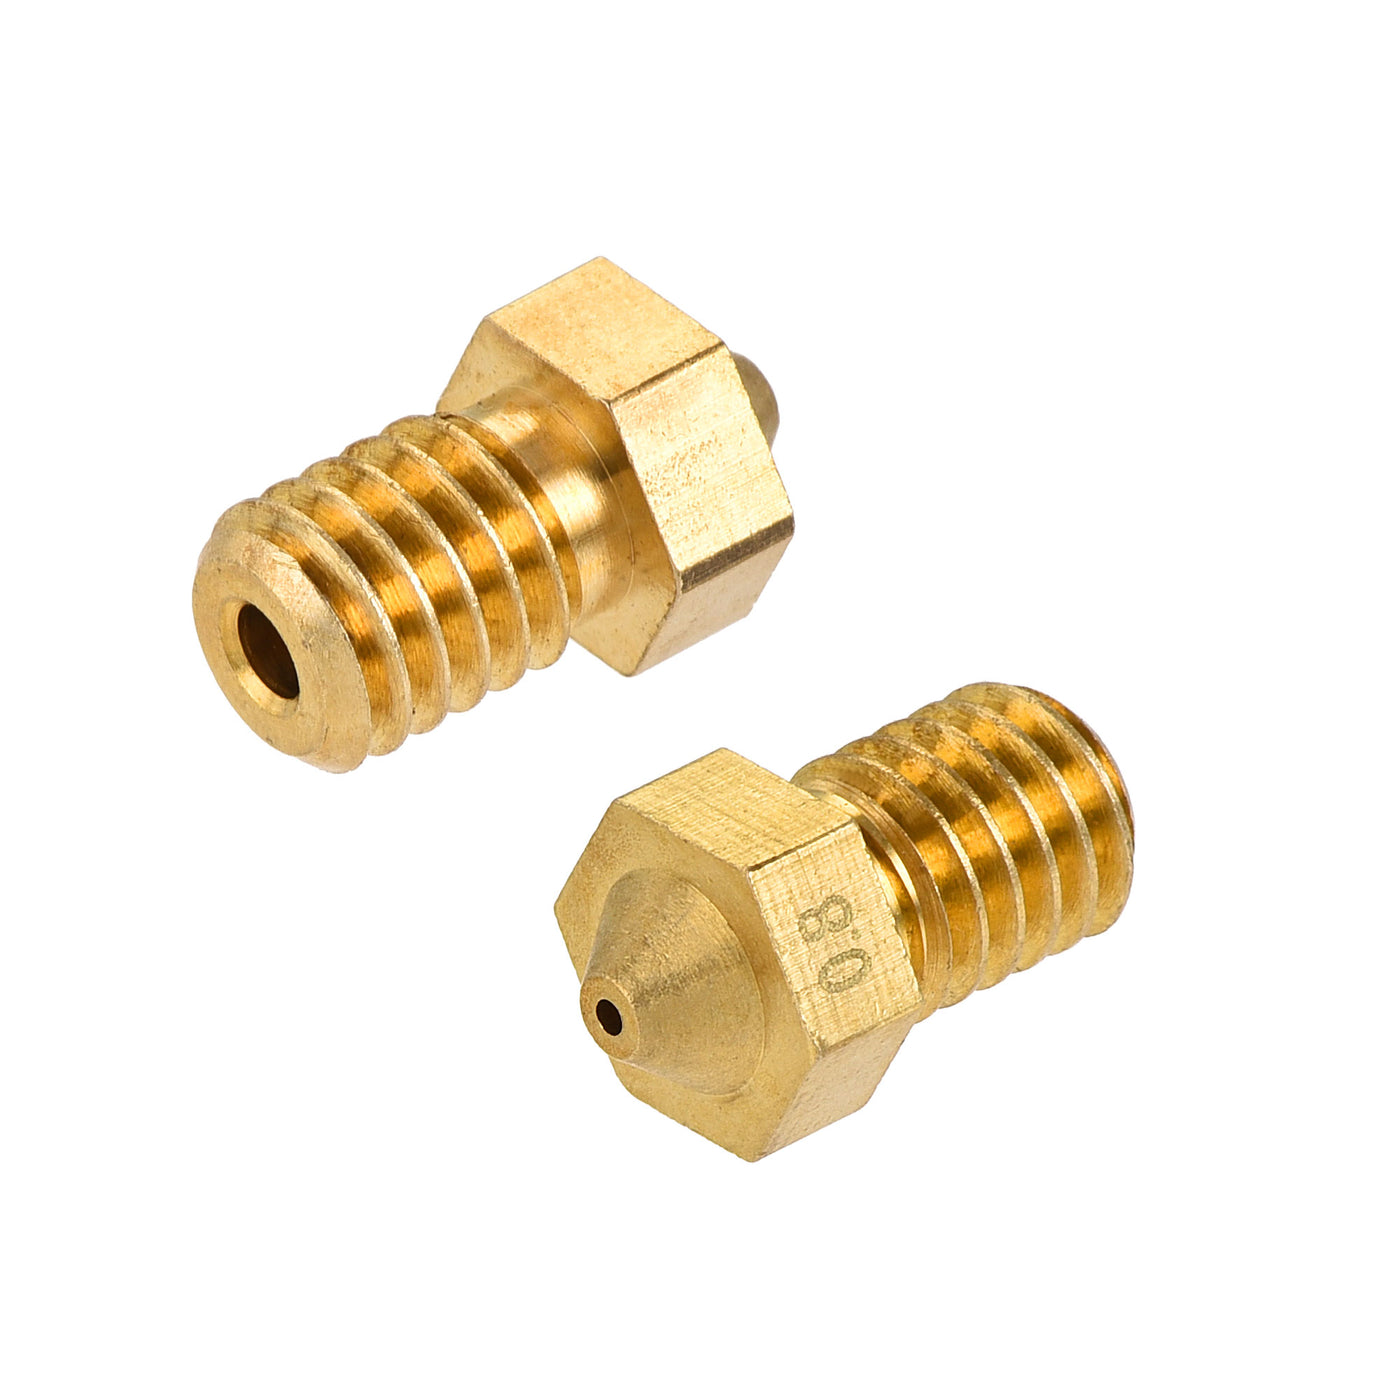 uxcell Uxcell 0.8mm 3D Printer Nozzle, 20pcs M6 Thread for V5 V6 1.75mm Extruder Print, Brass